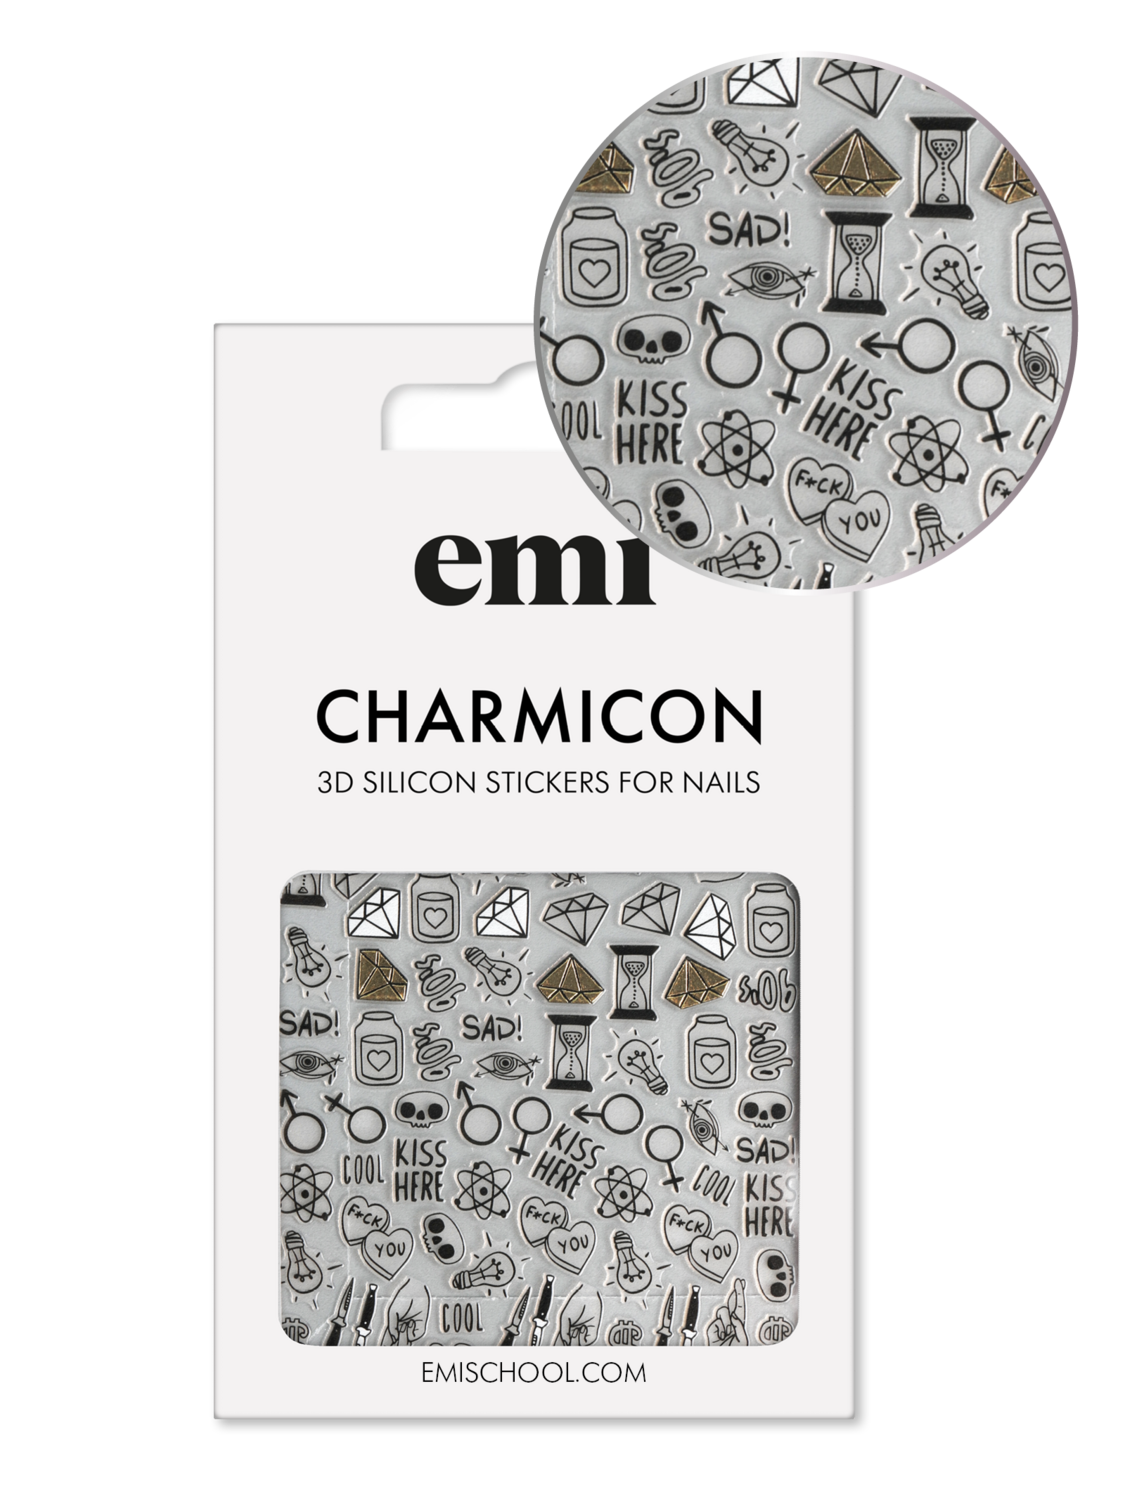 Charmicon 3D Silicone Stickers #189 Оwn Atmosphere